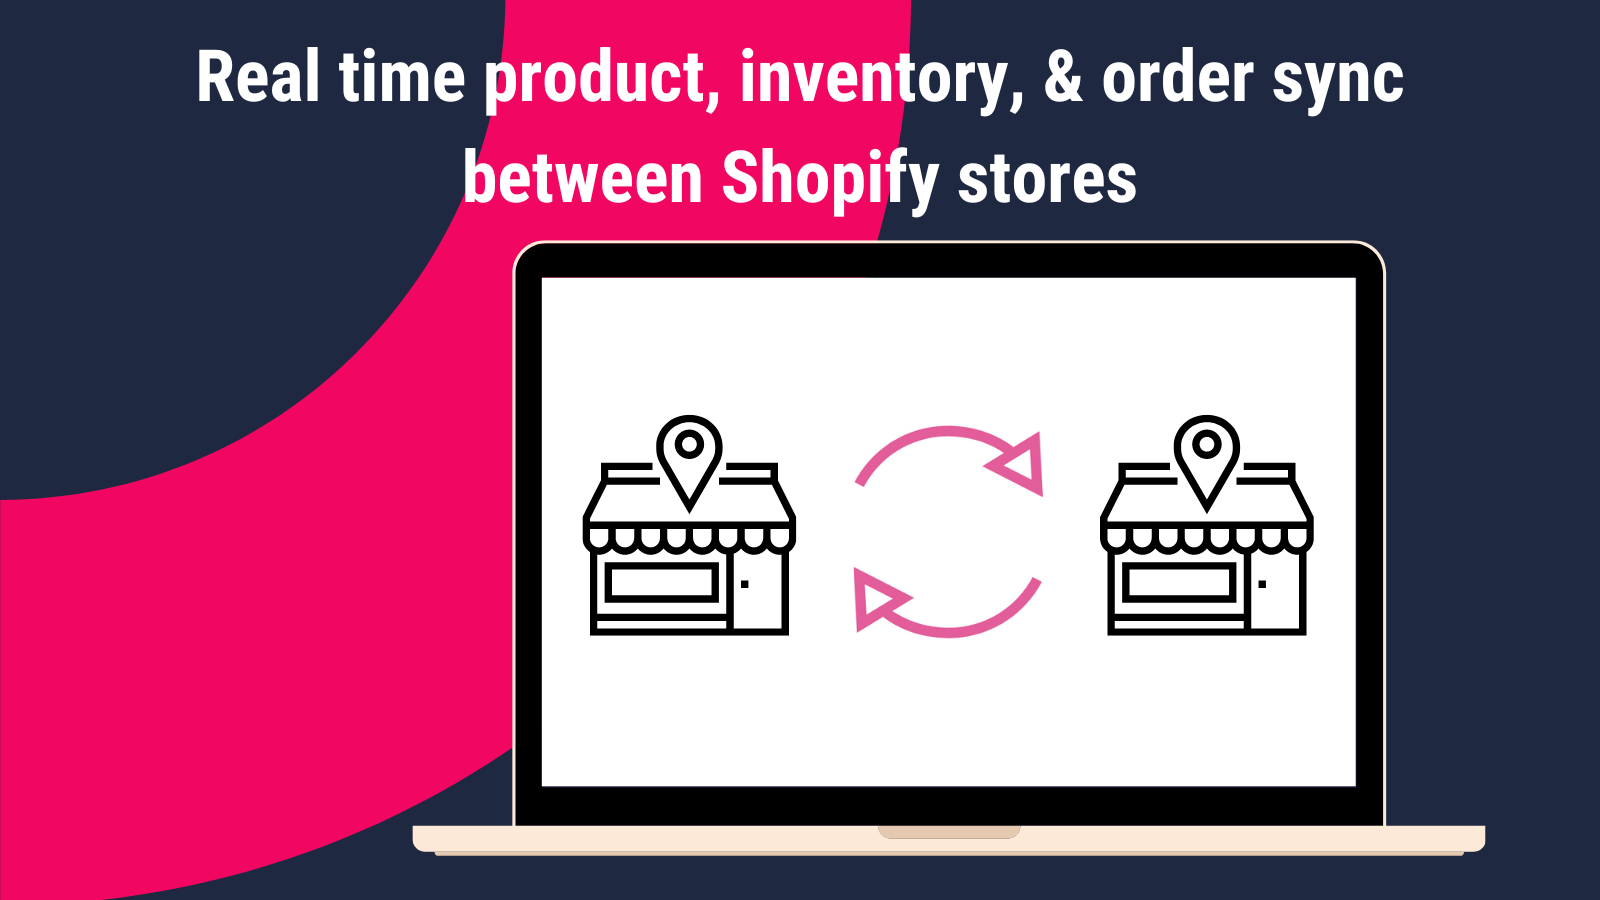 Real time product, inventory, order sync between Shopify stores